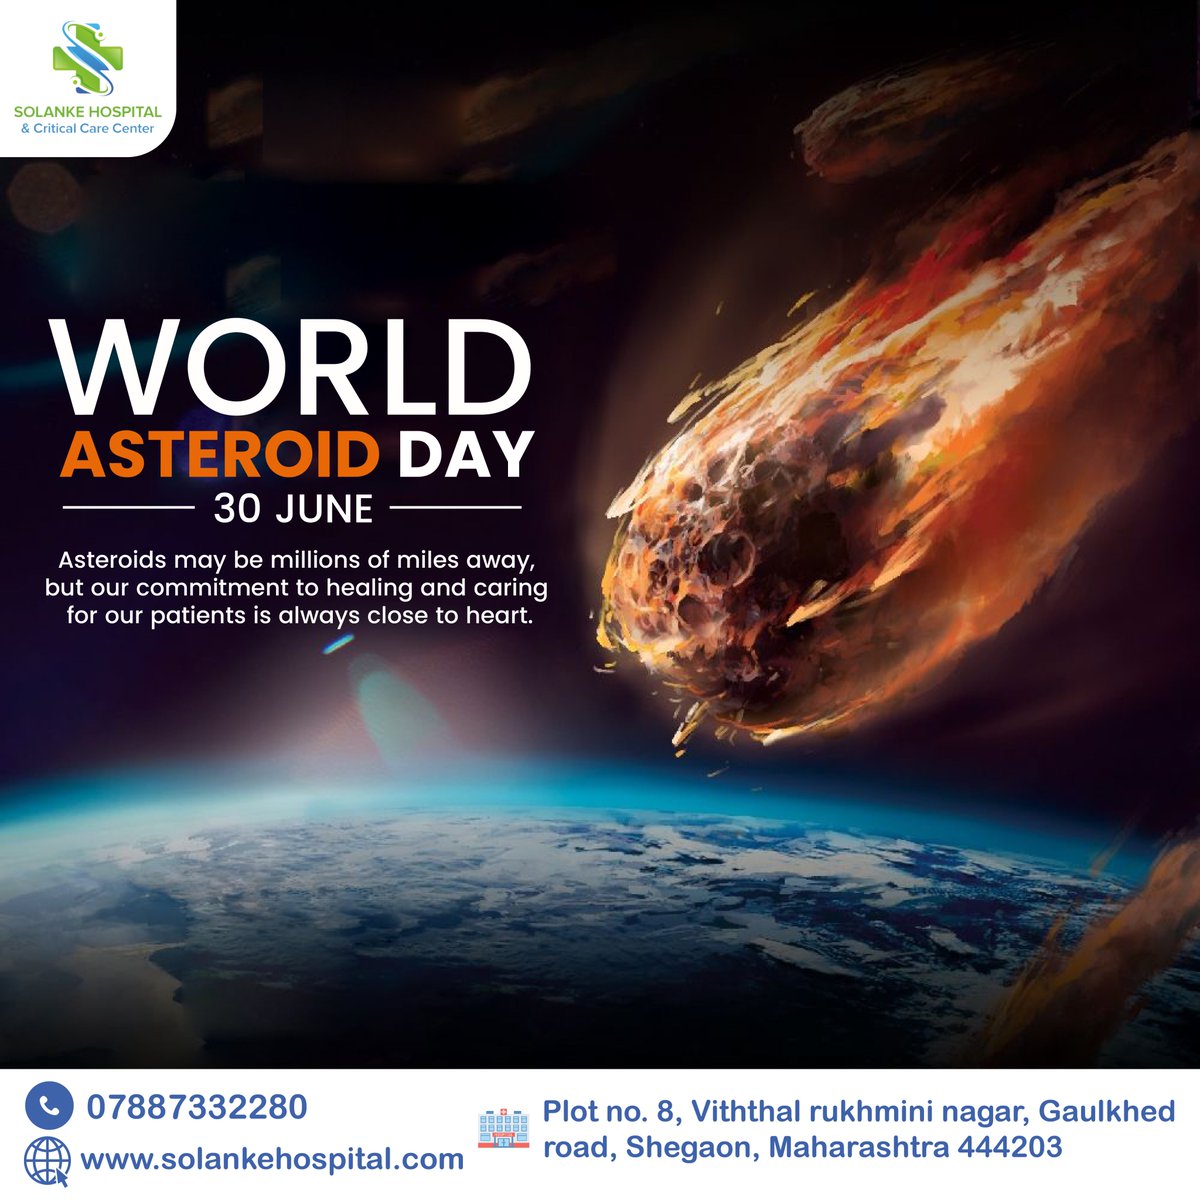 🌍✨ Embracing the Cosmos and Protecting Lives! 🚀🔬 On this World Asteroid Day, I'm reminded of the immense responsibility we have as doctors to safeguard humanity's future.
.
.
.
#WorldAsteroidDay #CosmicResponsibility #ProtectingLives #MedicalInnovation #SafeguardingOurFuture